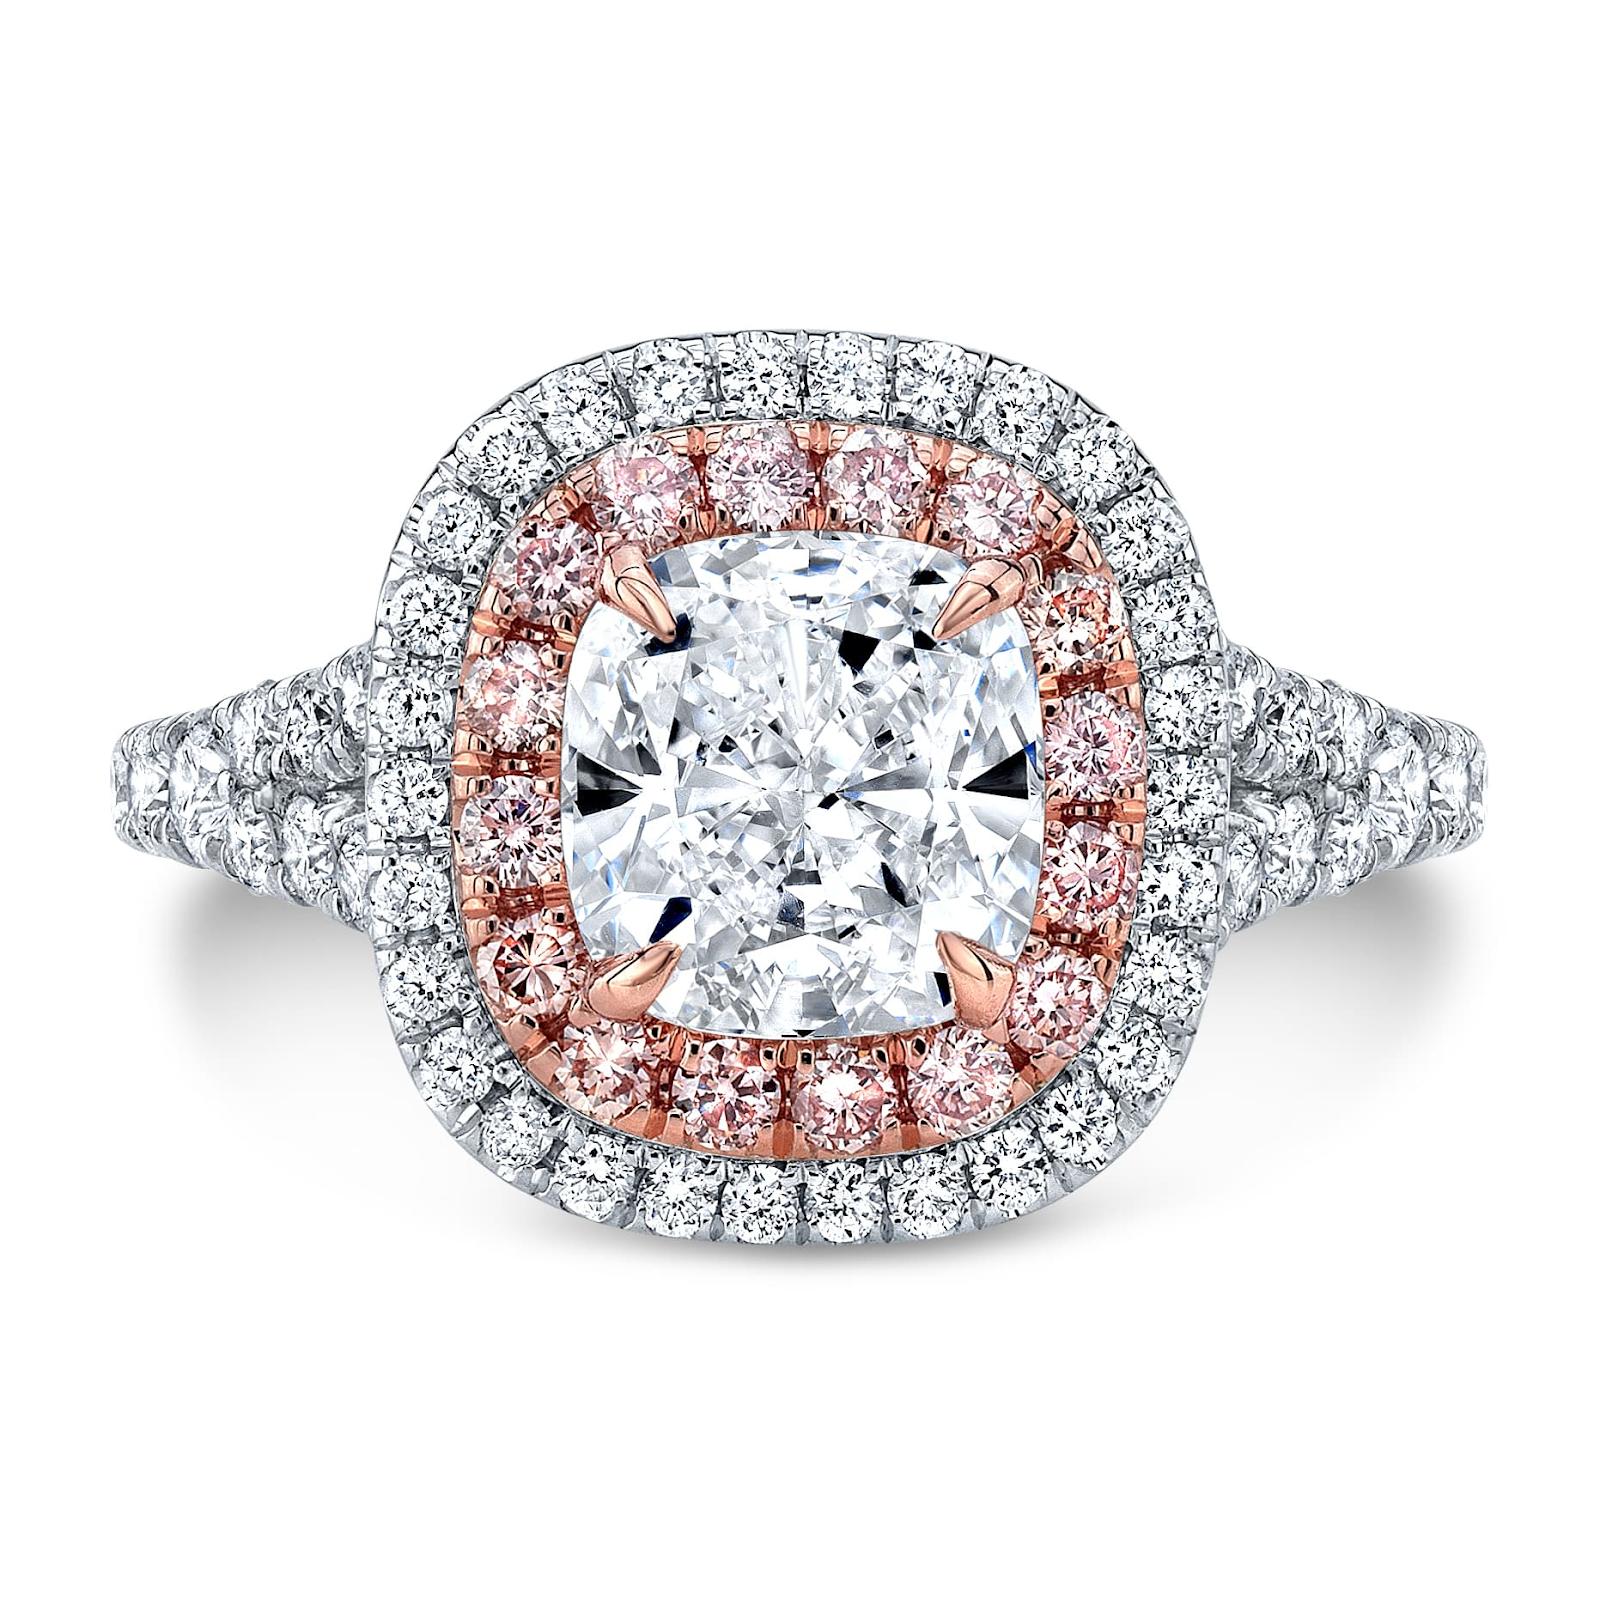 Celebrity Engagement Rings 2021: Photos, Cuts, Carats, More | Life & Style